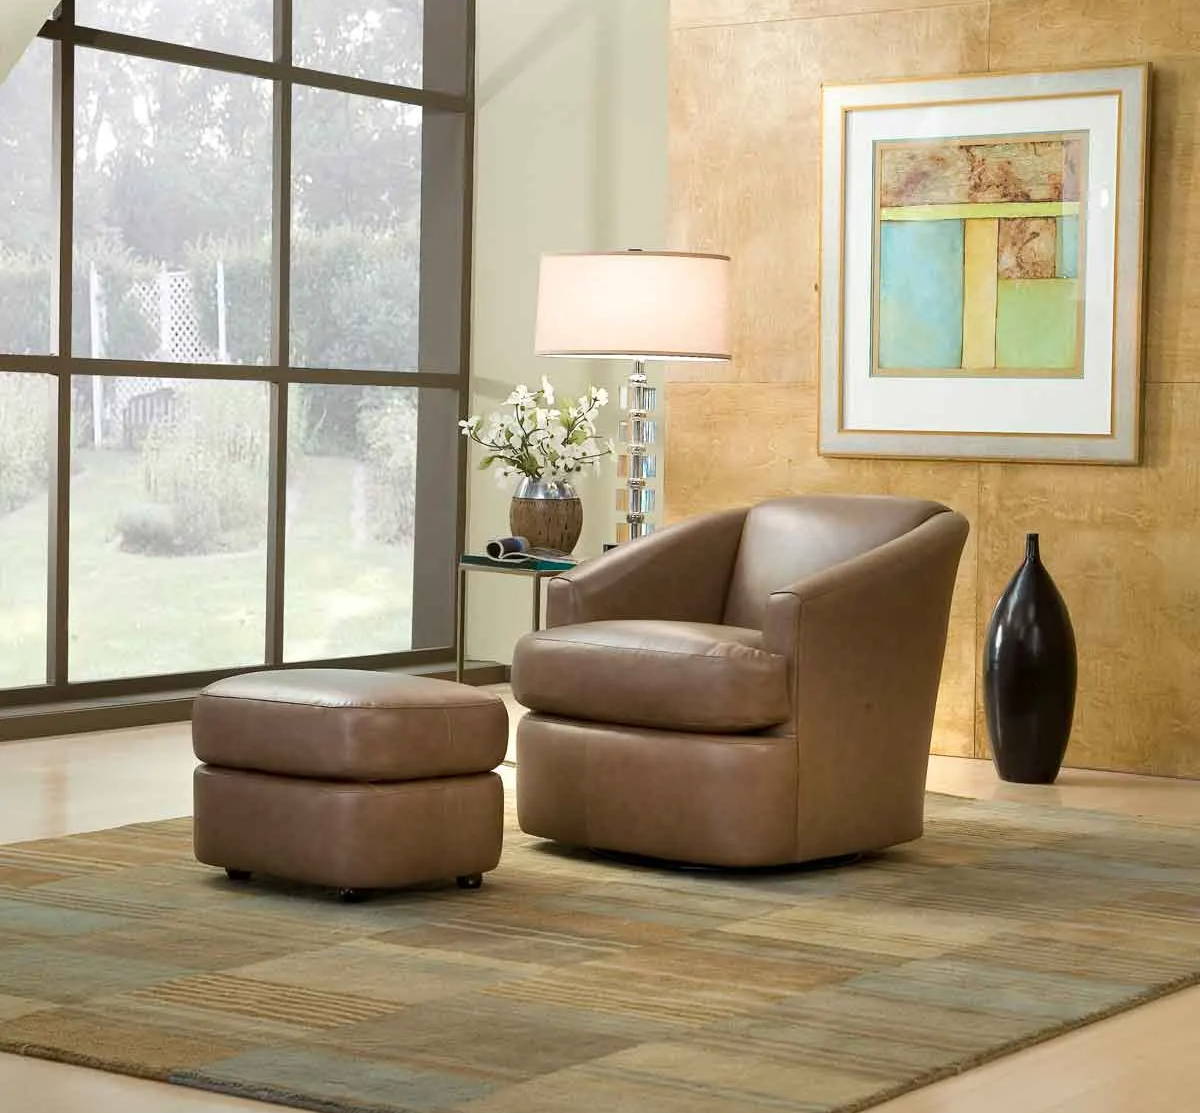 8 Healing leather furniture tips ideas  leather furniture, leather,  leather couch